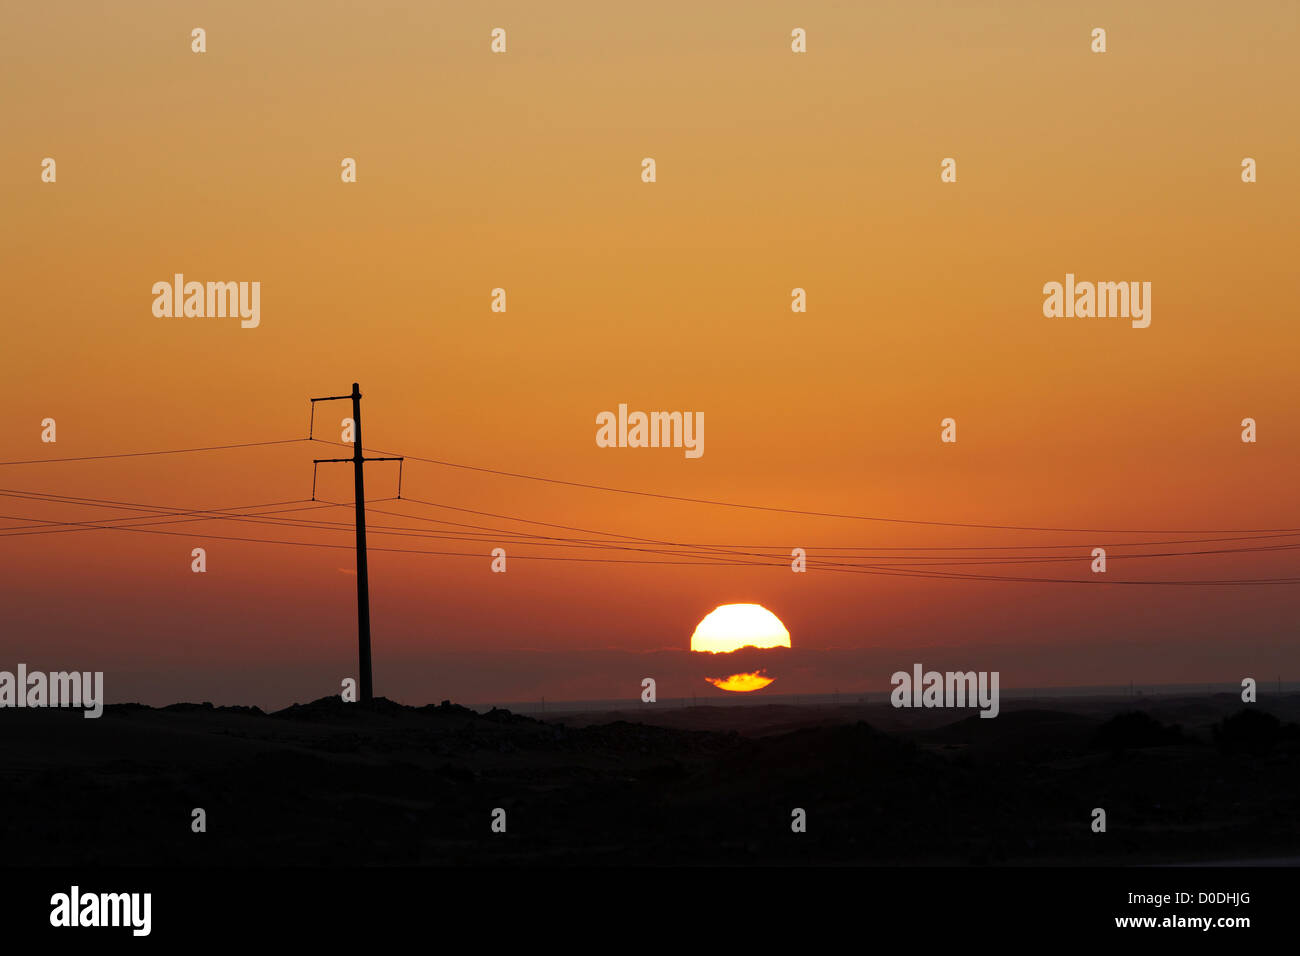 Setting sun silhouettes high voltage power lines and power line pole, near Laayoune, Western Sahara, North Africa Stock Photo